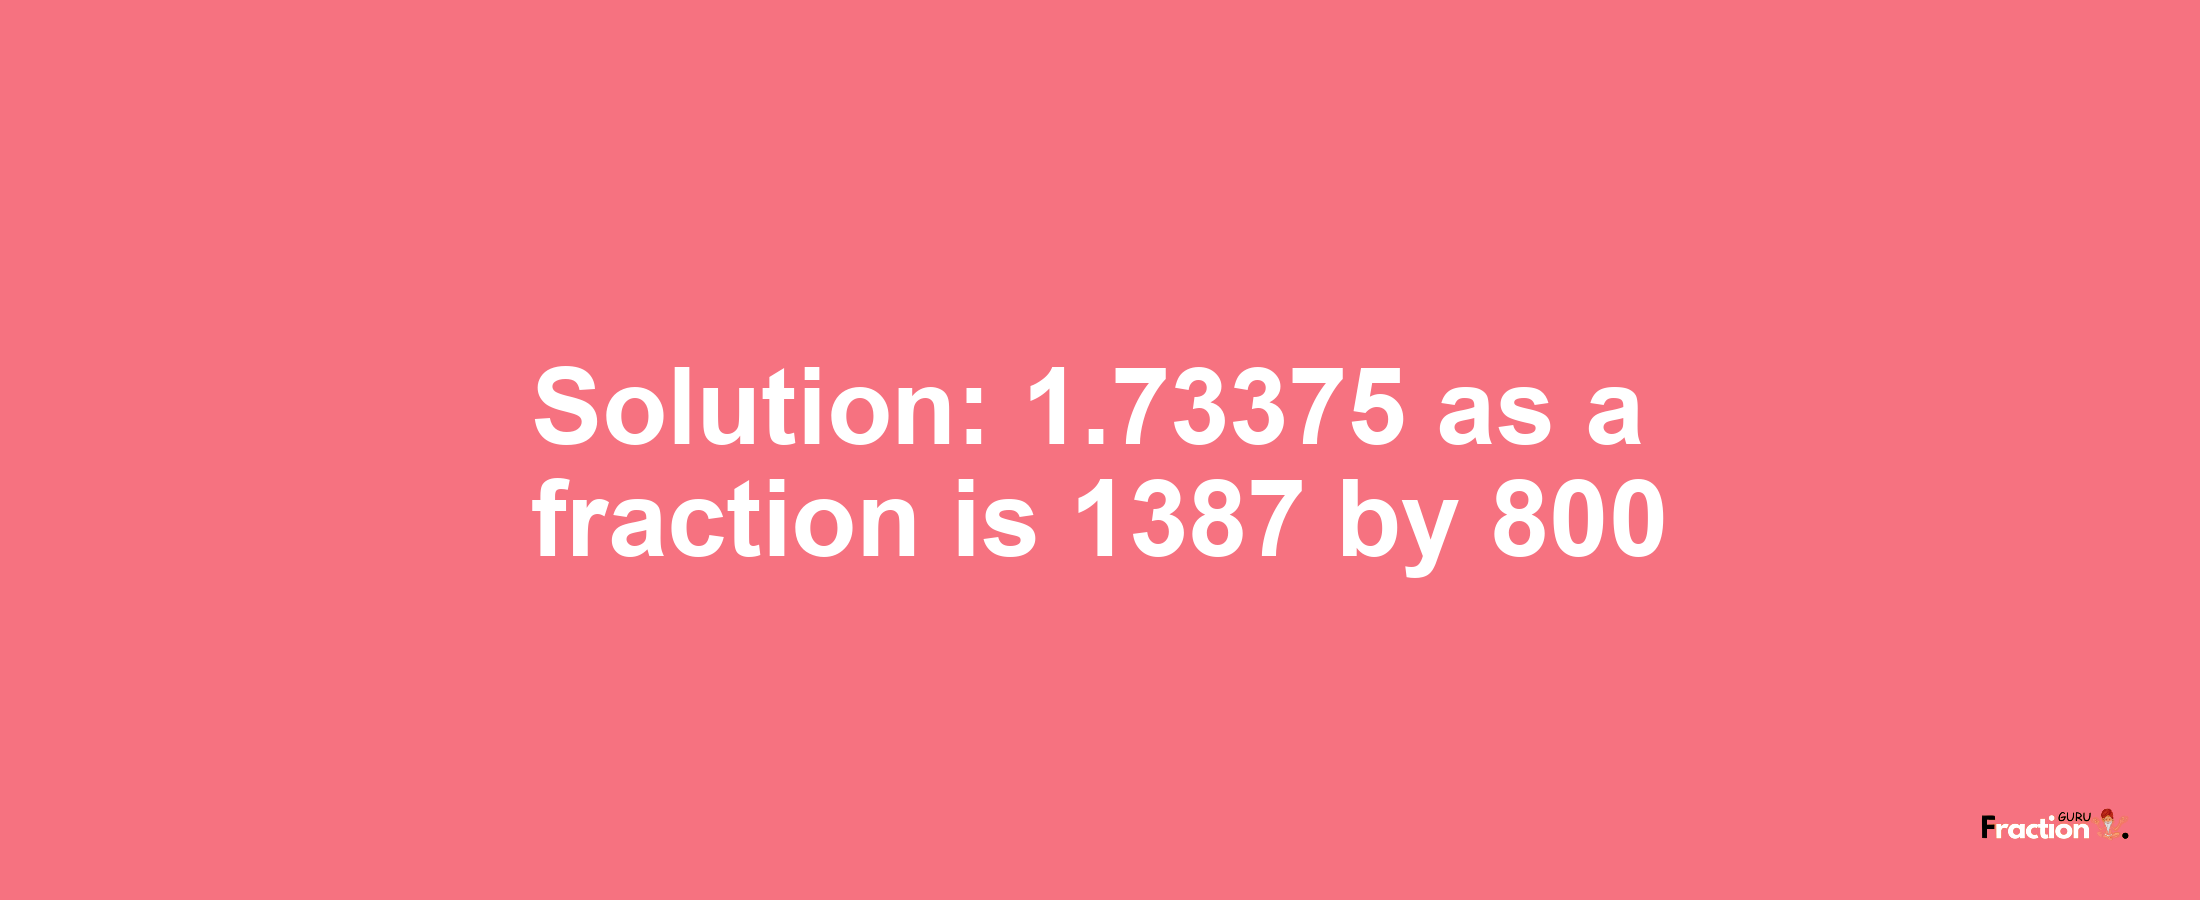 Solution:1.73375 as a fraction is 1387/800